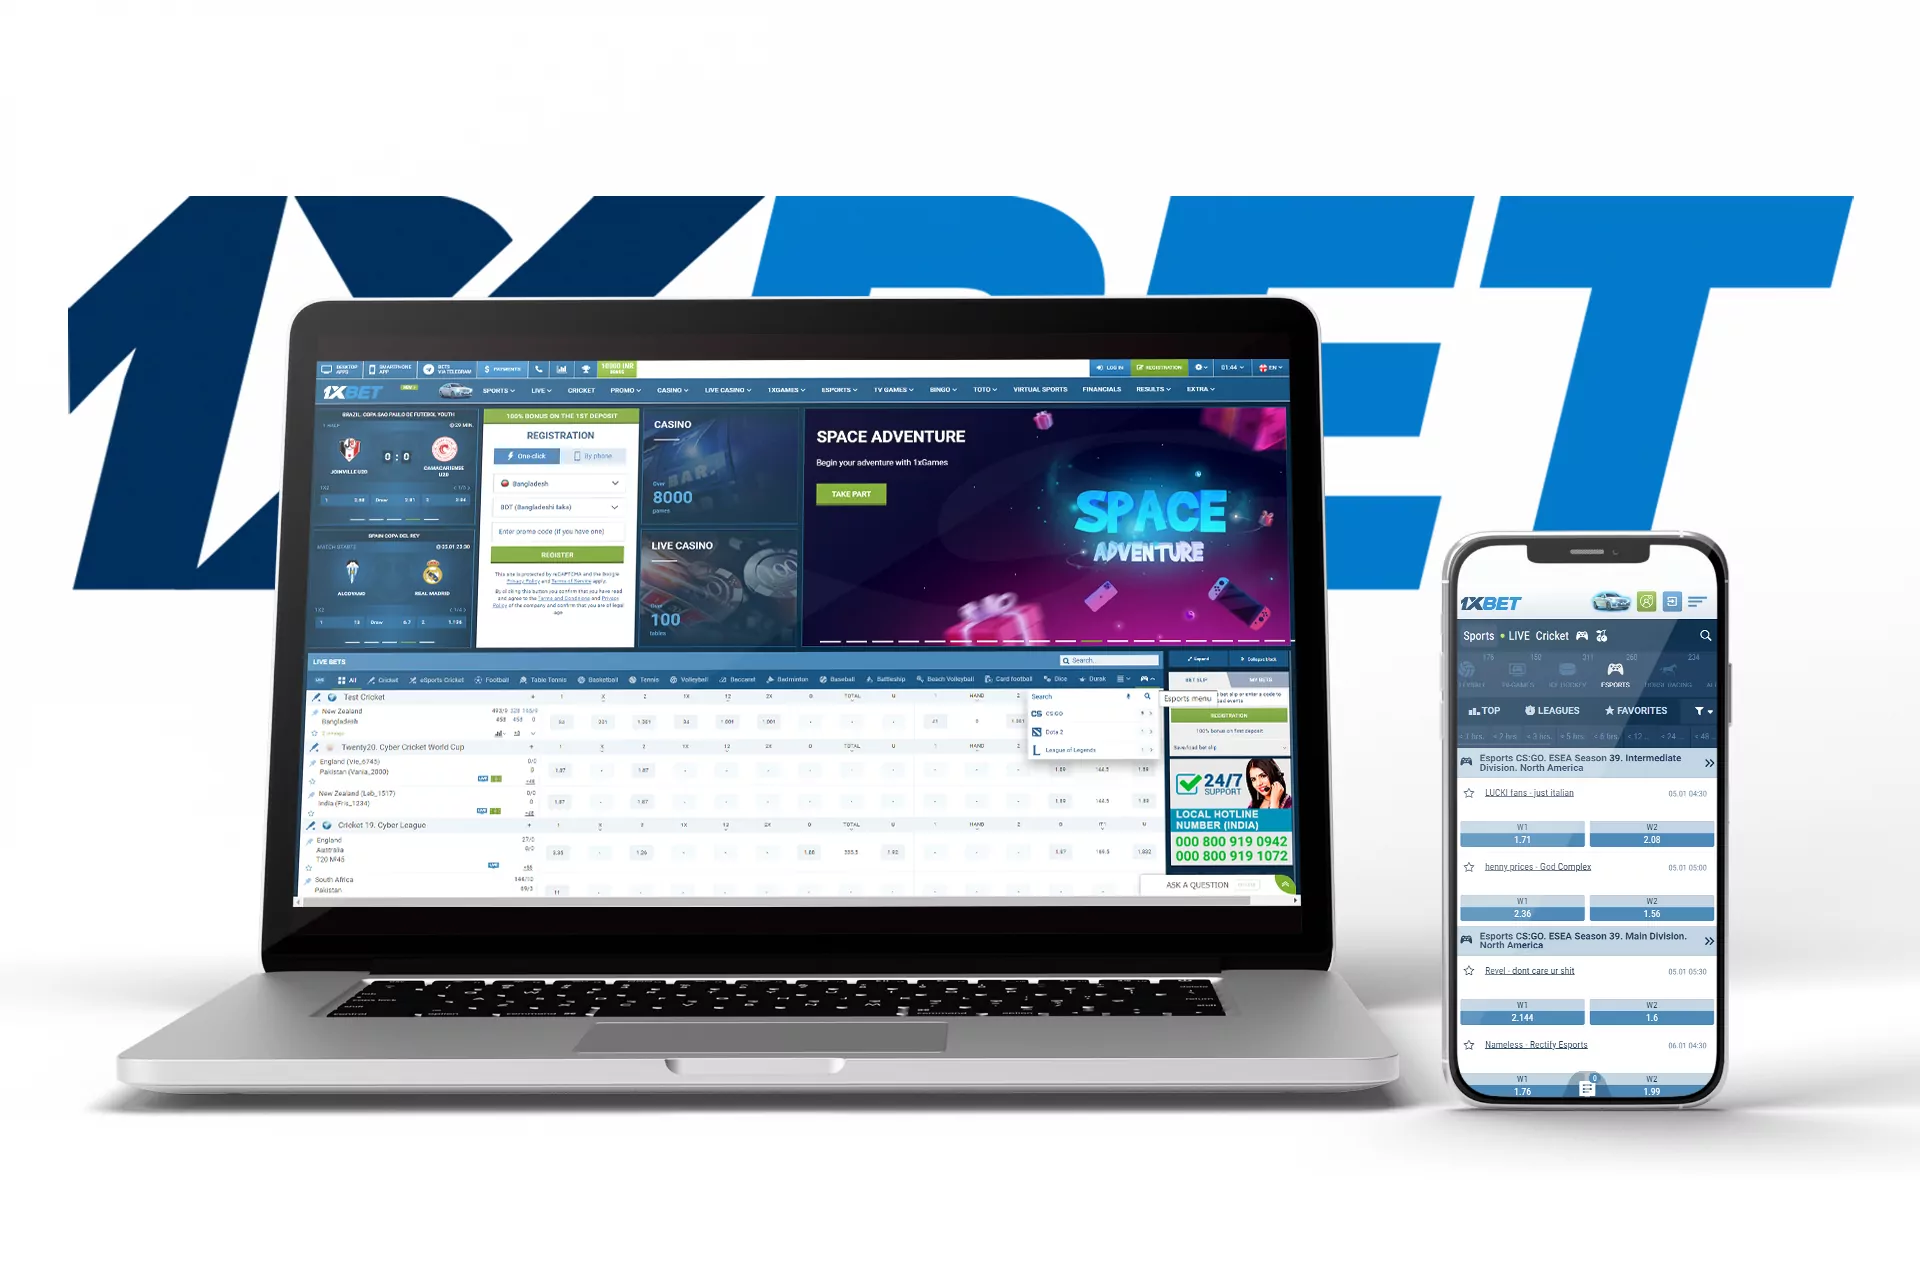 1xbet is an extensively popular betting site that has an esports section for placing bets on cybersports matches.